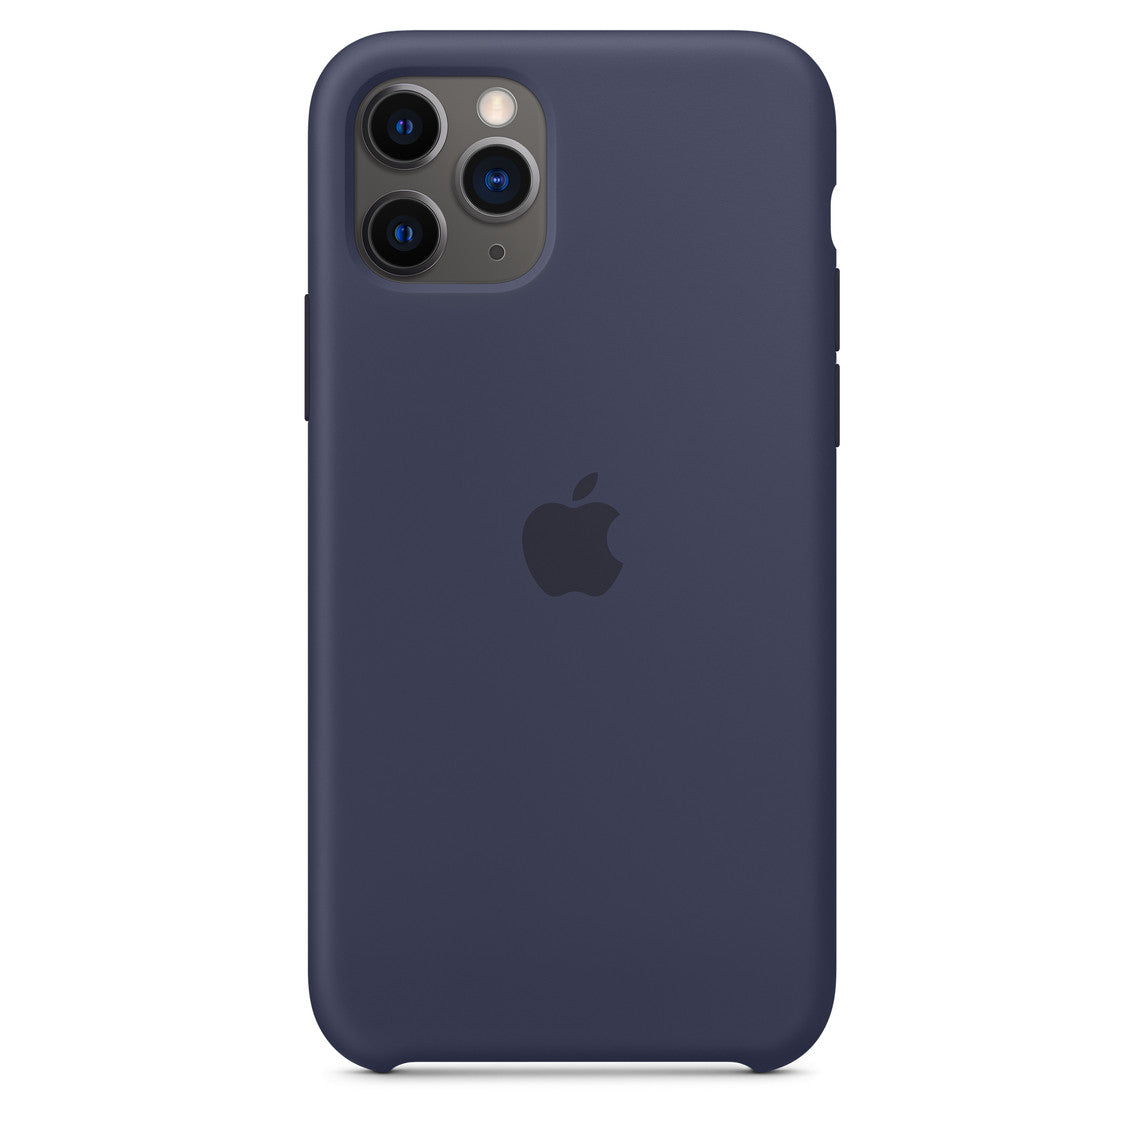 Apple iPhone 11 Pro Silicone Case - Midnight Blue Midnight Blue New - Sealed